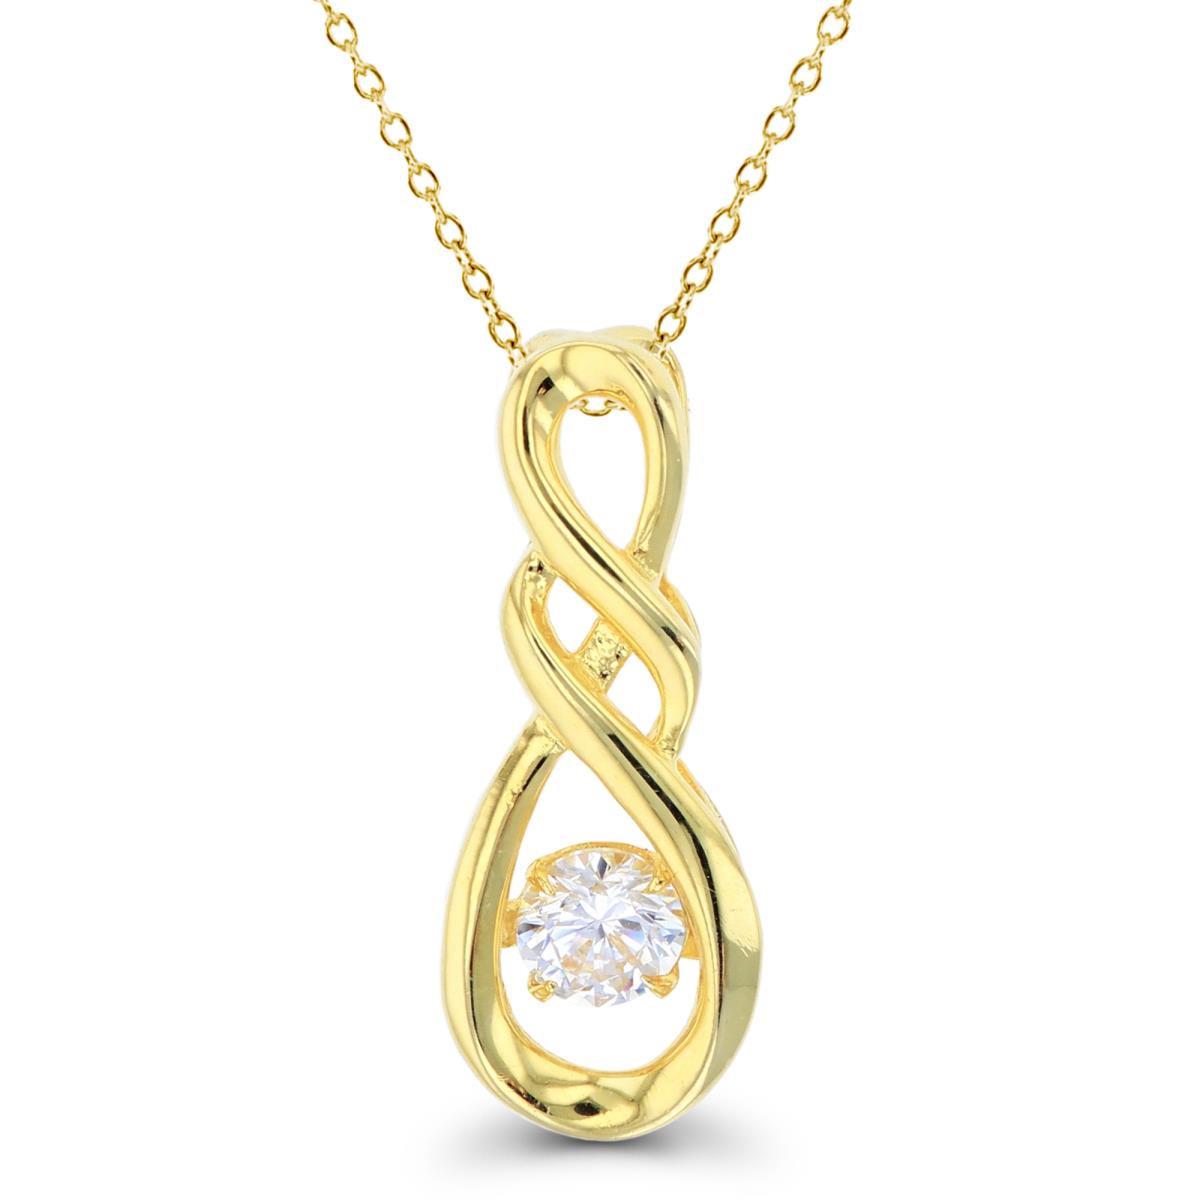 Sterling Silver Yellow 5mm Rnd White CZ Dancing in Vertical Infinity 18"Necklace